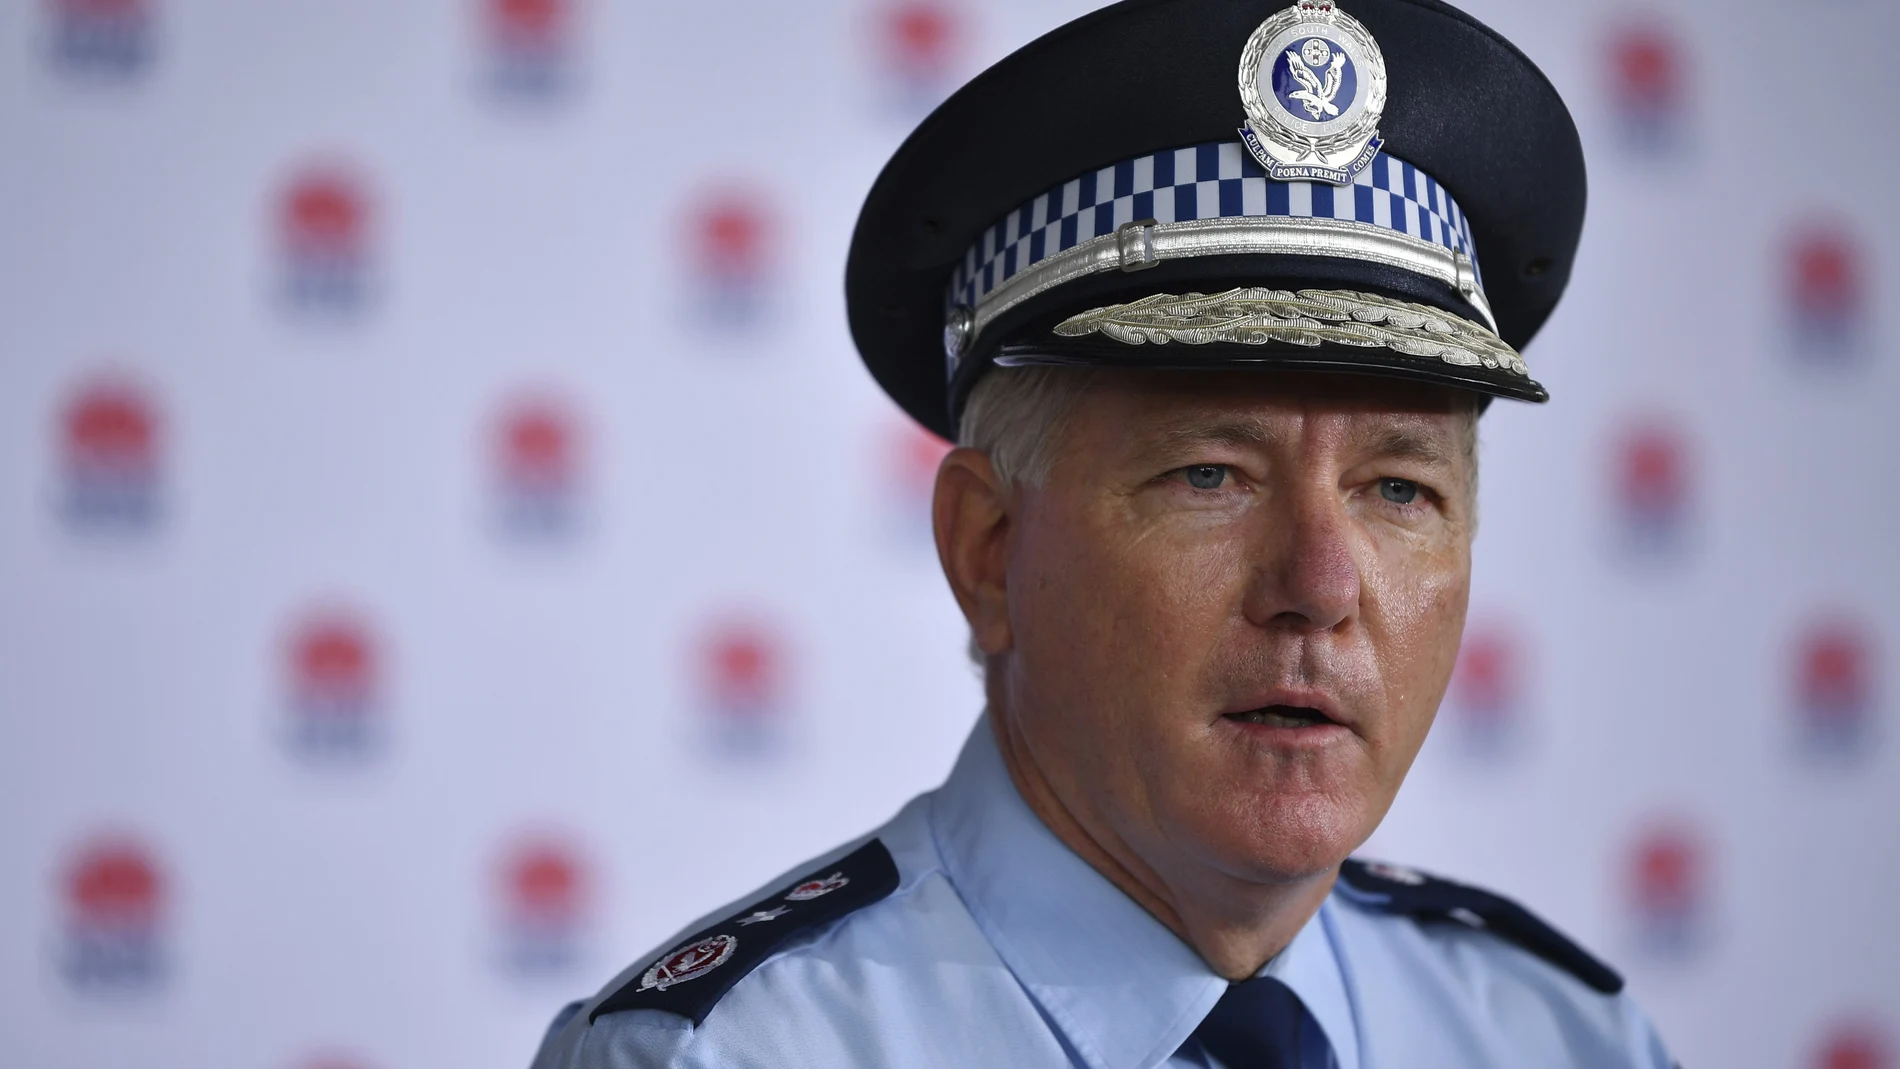 New South Wales Police Commissioner Mick Fuller speaks to media during a COVID-19 update in Sydney, Monday, June 28, 2021. Two naked men were rescued by emergency services from an Australian forest after they were startled by a deer while nude sunbathing on a beach and became lost, police say. (Joel Carrett/AAP Image via AP)